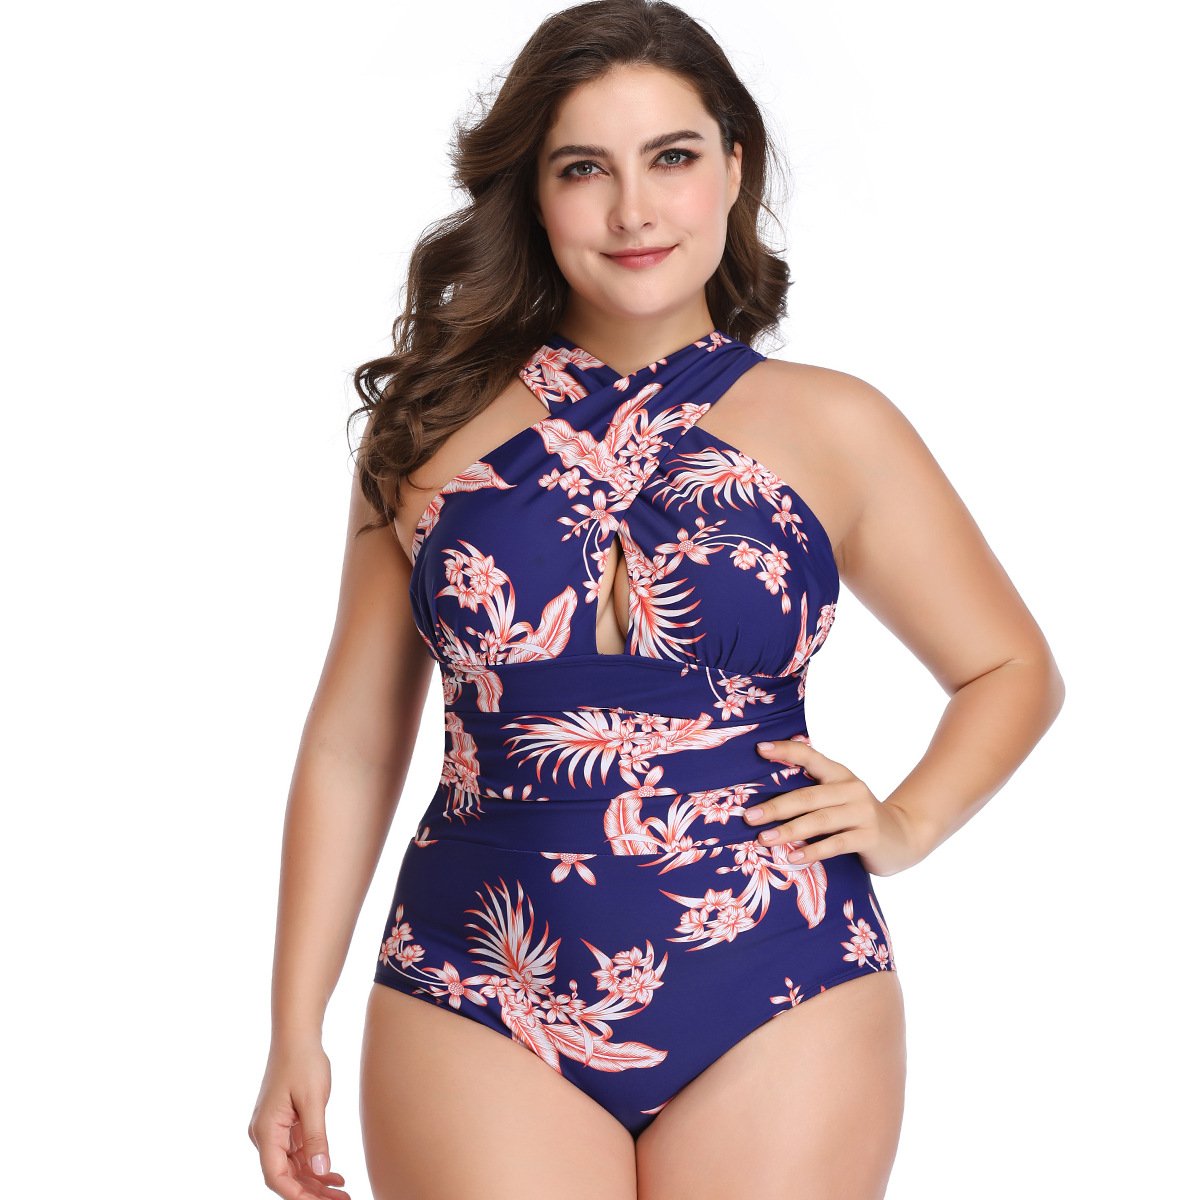 Plus Size Women One Piece Halter Swimsuit-Leaf Print-S-Free Shipping at meselling99